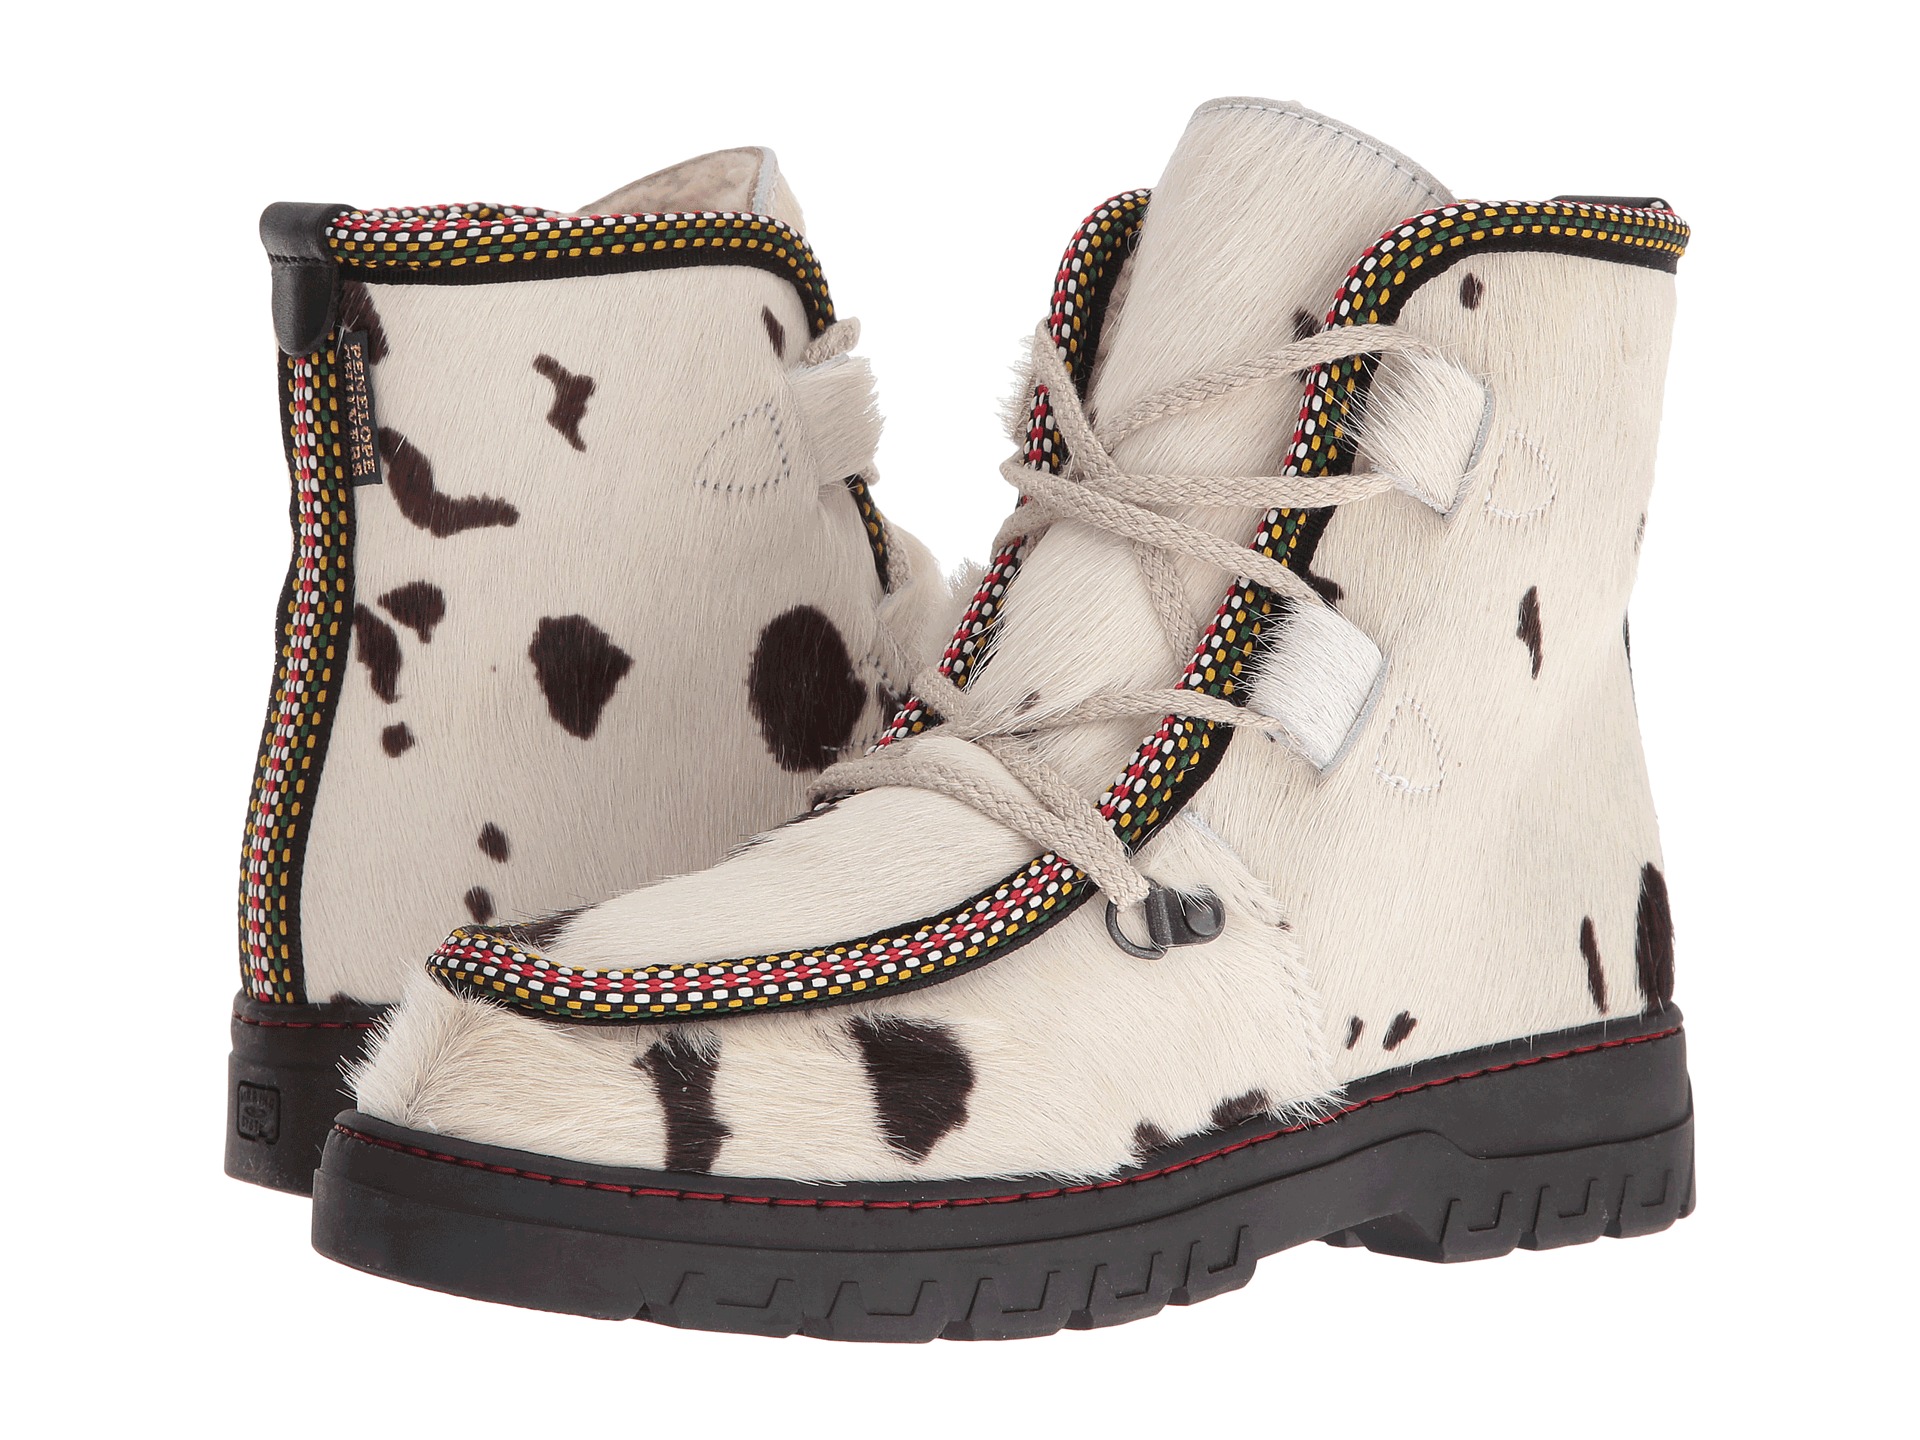 Penelope Chilvers Incredible Boot Gintonic - Zappos.com Free Shipping ...